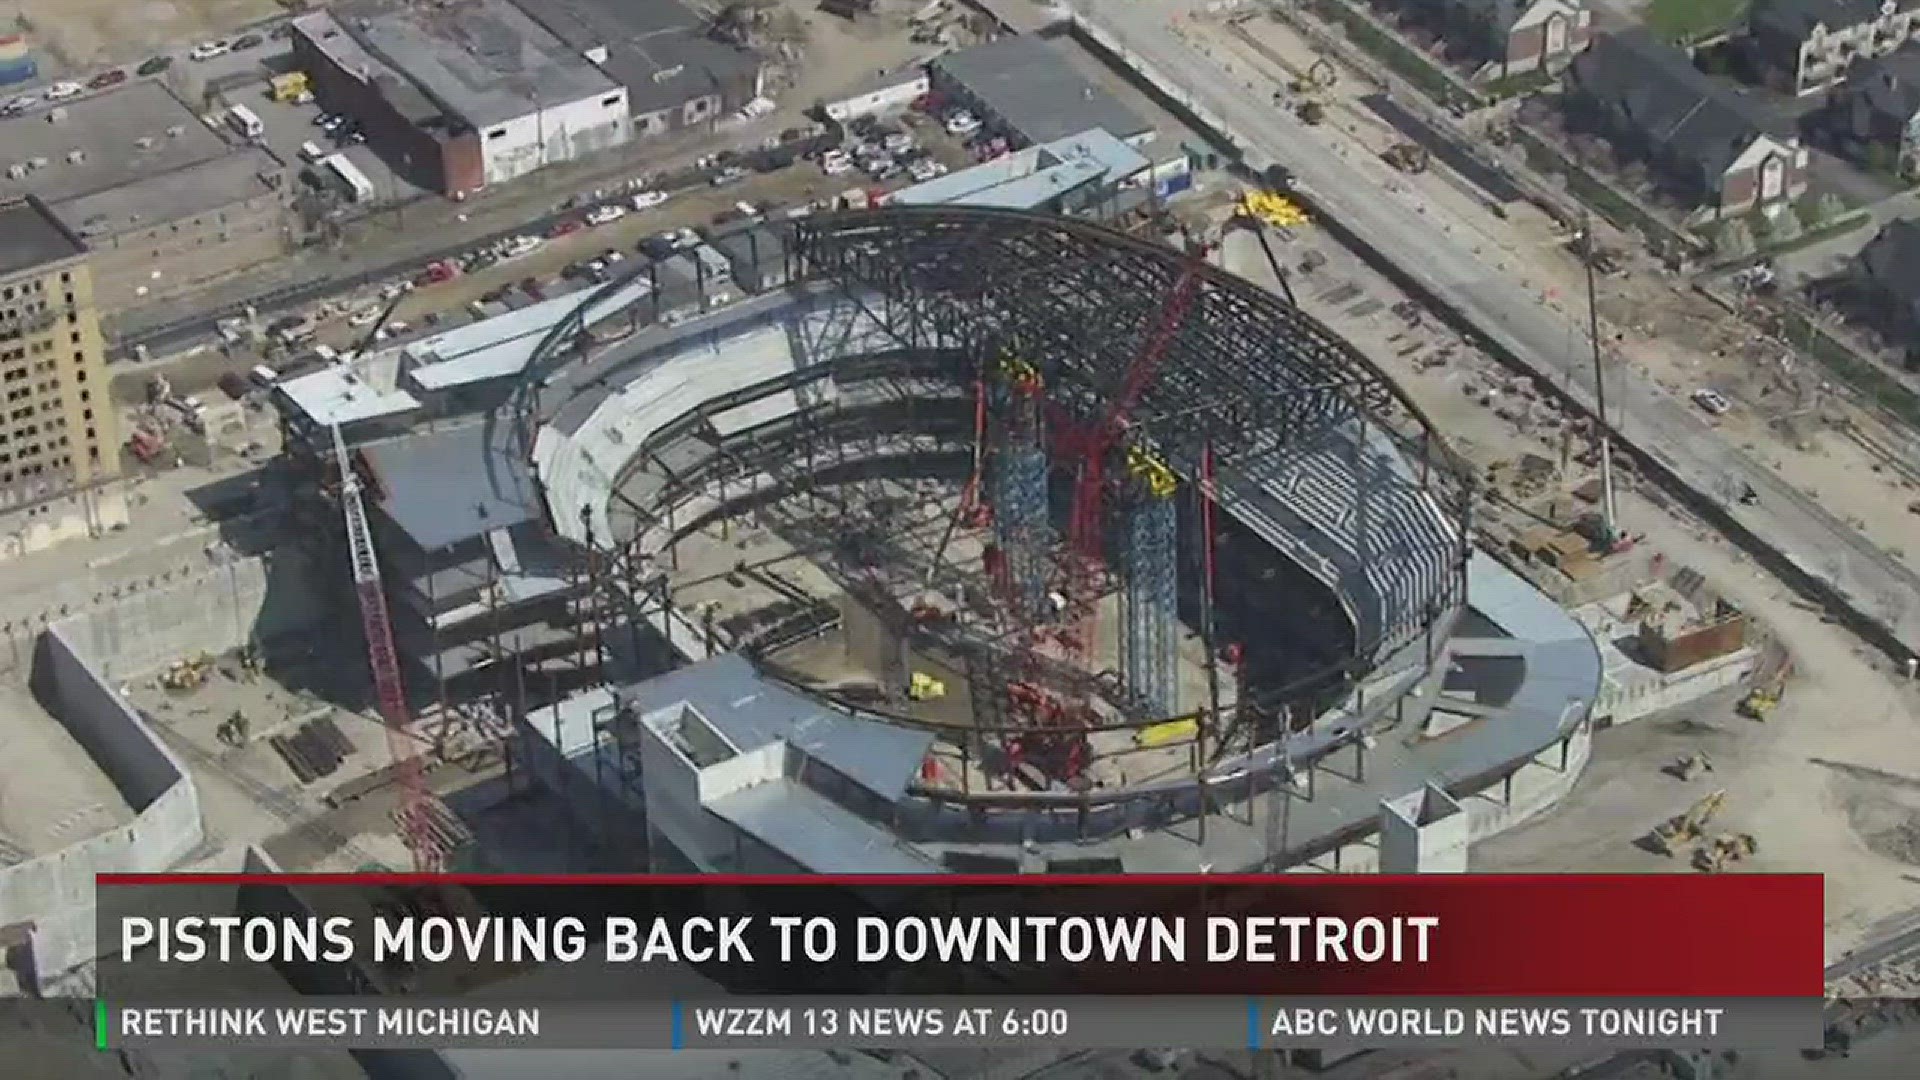 For the first time since the 1970s, the Detroit Pistons will play their home games in Detroit